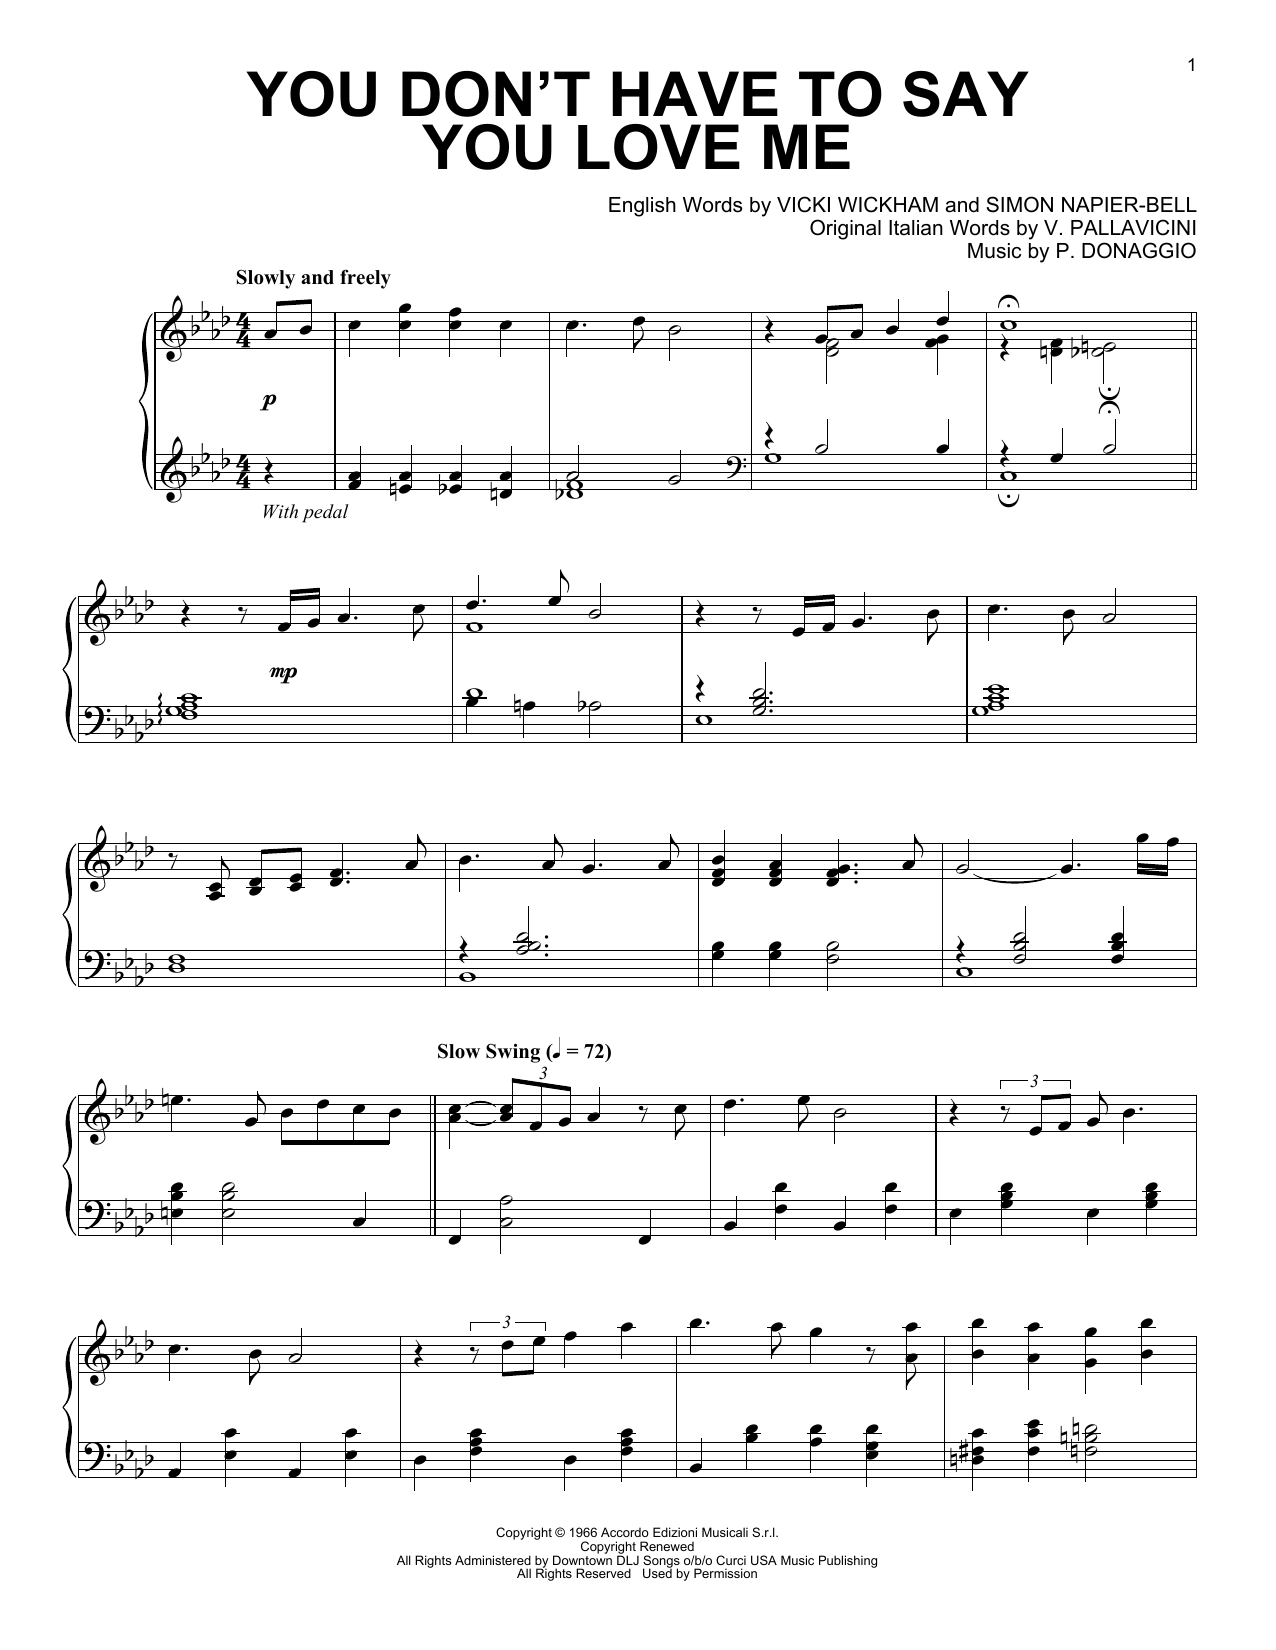 Download Elvis Presley You Don't Have To Say You Love Me [Jazz Sheet Music